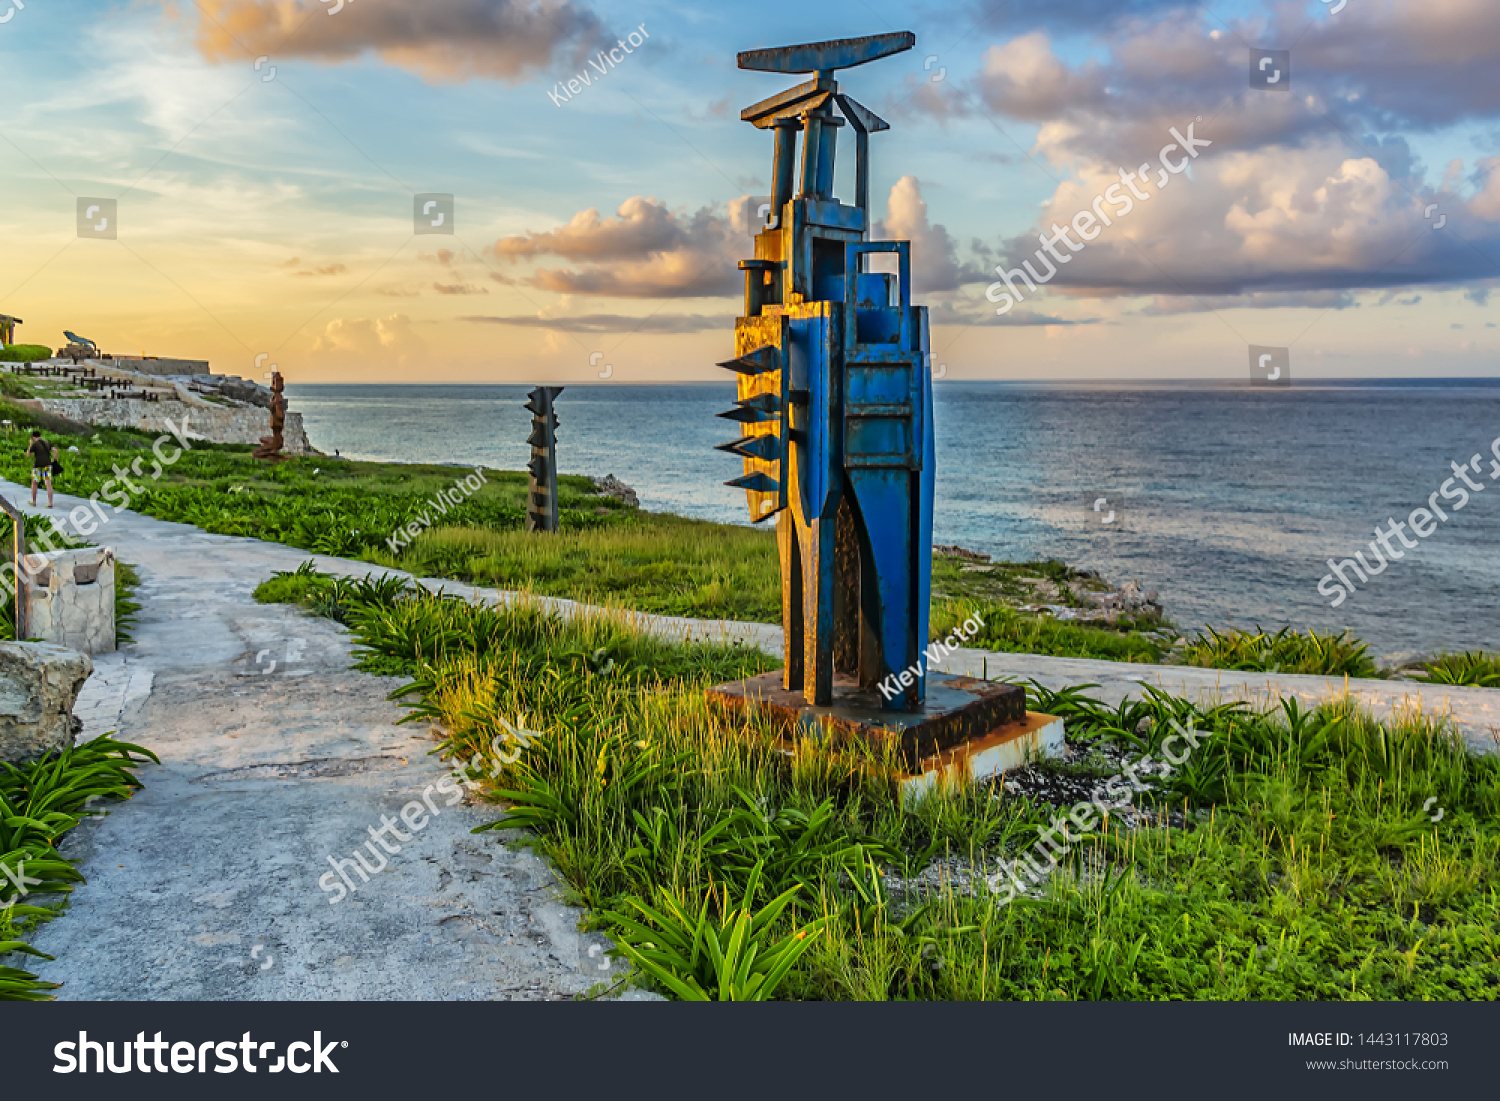 Isla Mujeres Mexico July 13 2015 Stock Image Download Now